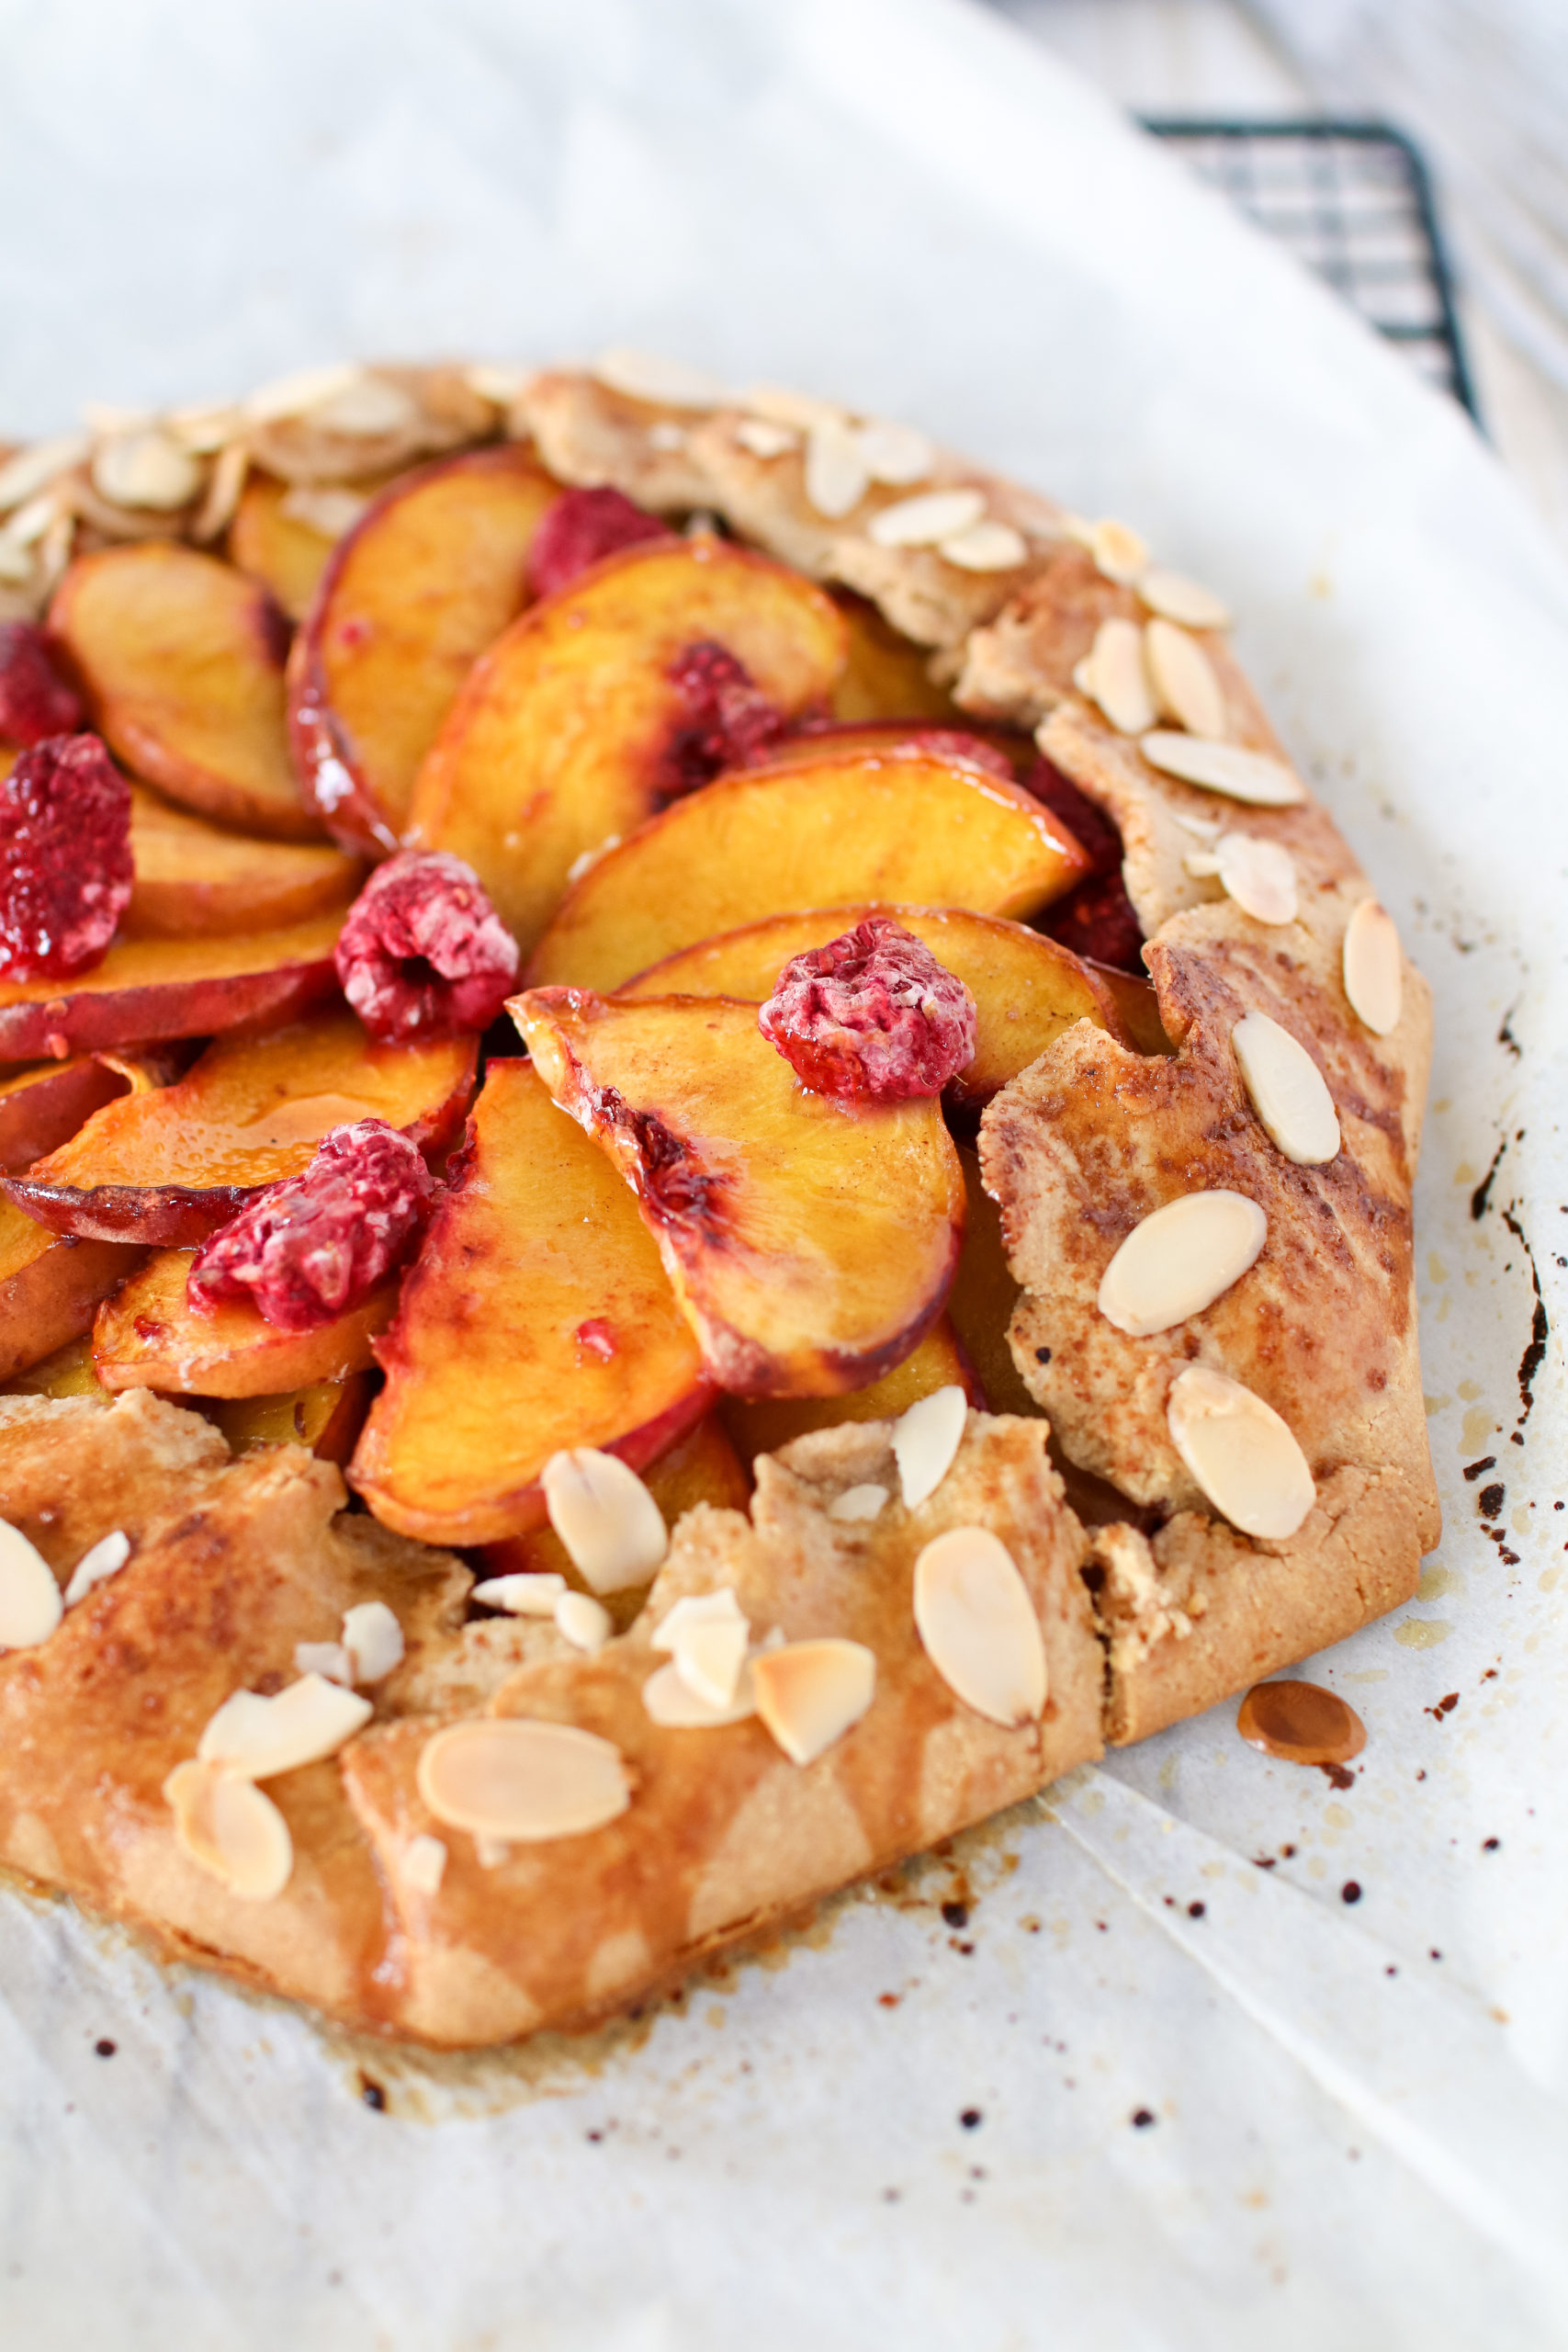 A rustic Peach Raspberry Galette filled with juicy peaches and tart raspberries, for the perfect end of summer dessert & the easiest pie you will ever make!